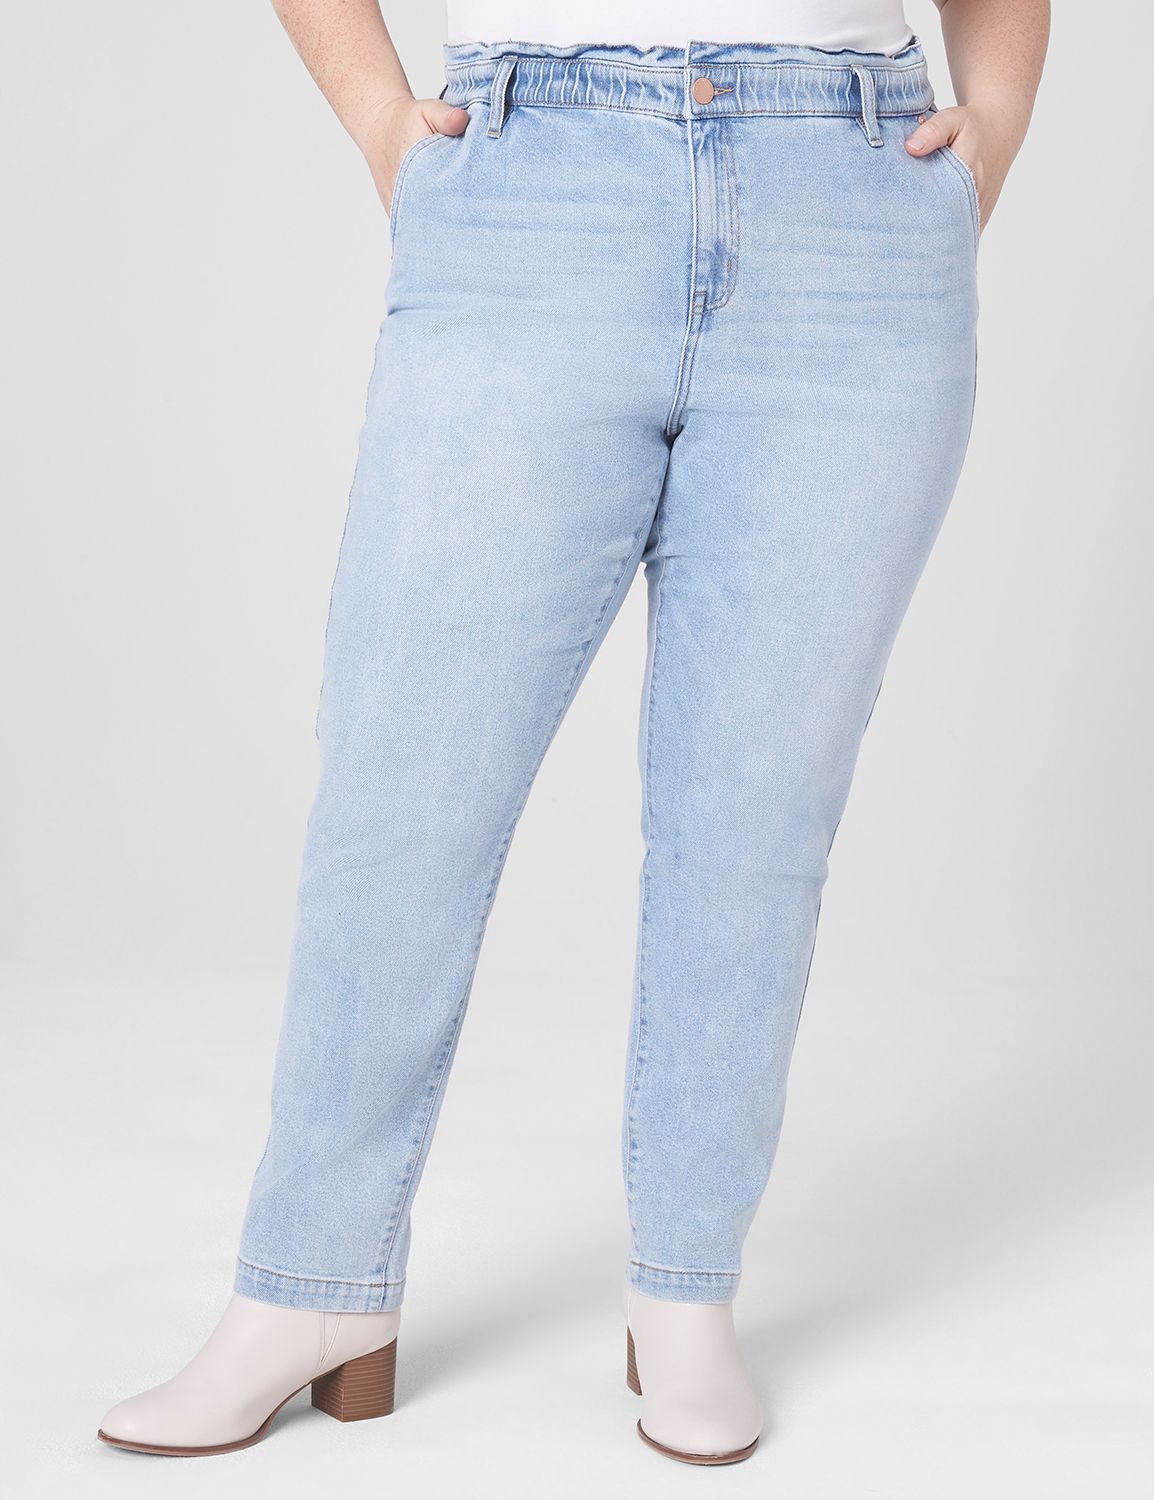 The Collection at RiverPark - Have you tried Lane Bryant jeans with the new  FLEX Magic Waistband yet?! #TheCollectionRP #LaneBryant #PlusSizeDenim  #LaneBryantDenim #CurvyDenim